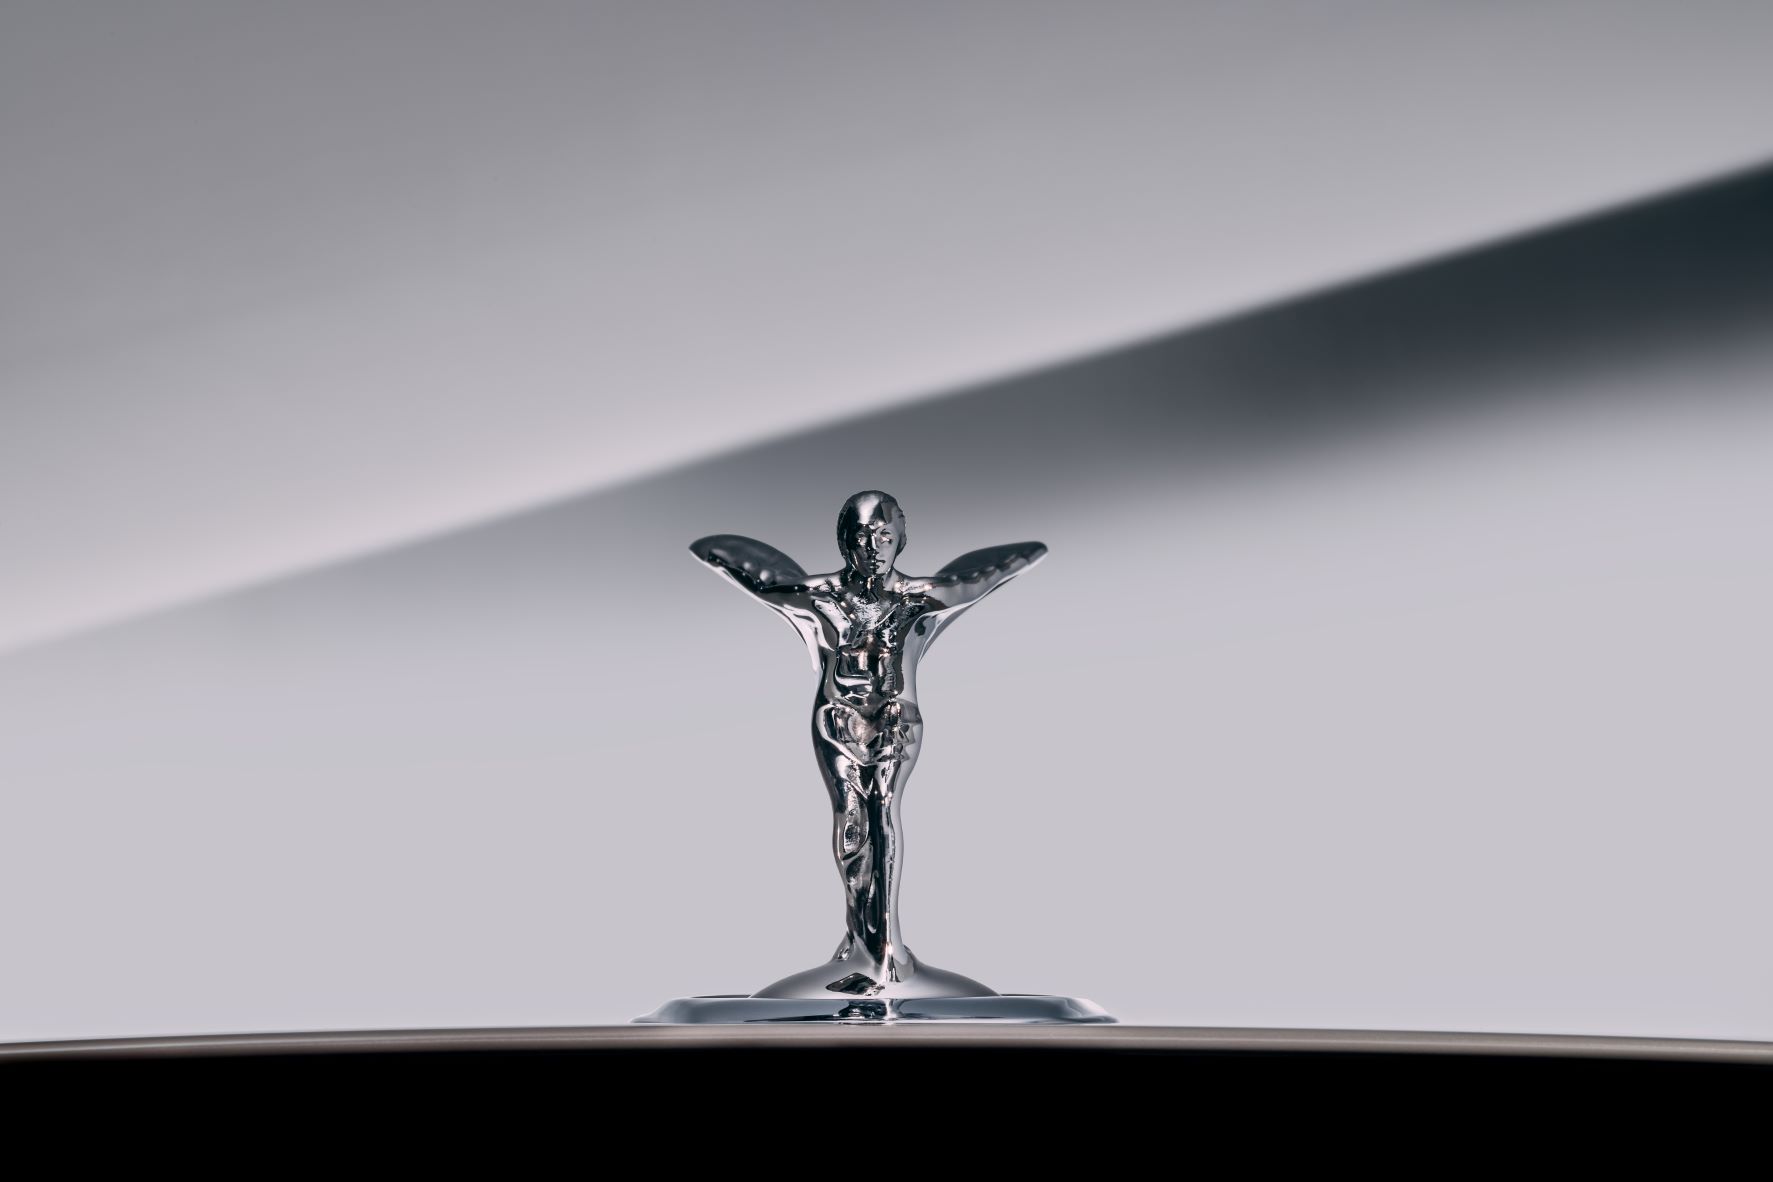 Frontal view of the redesigned Spirit of Ecstasy emblem